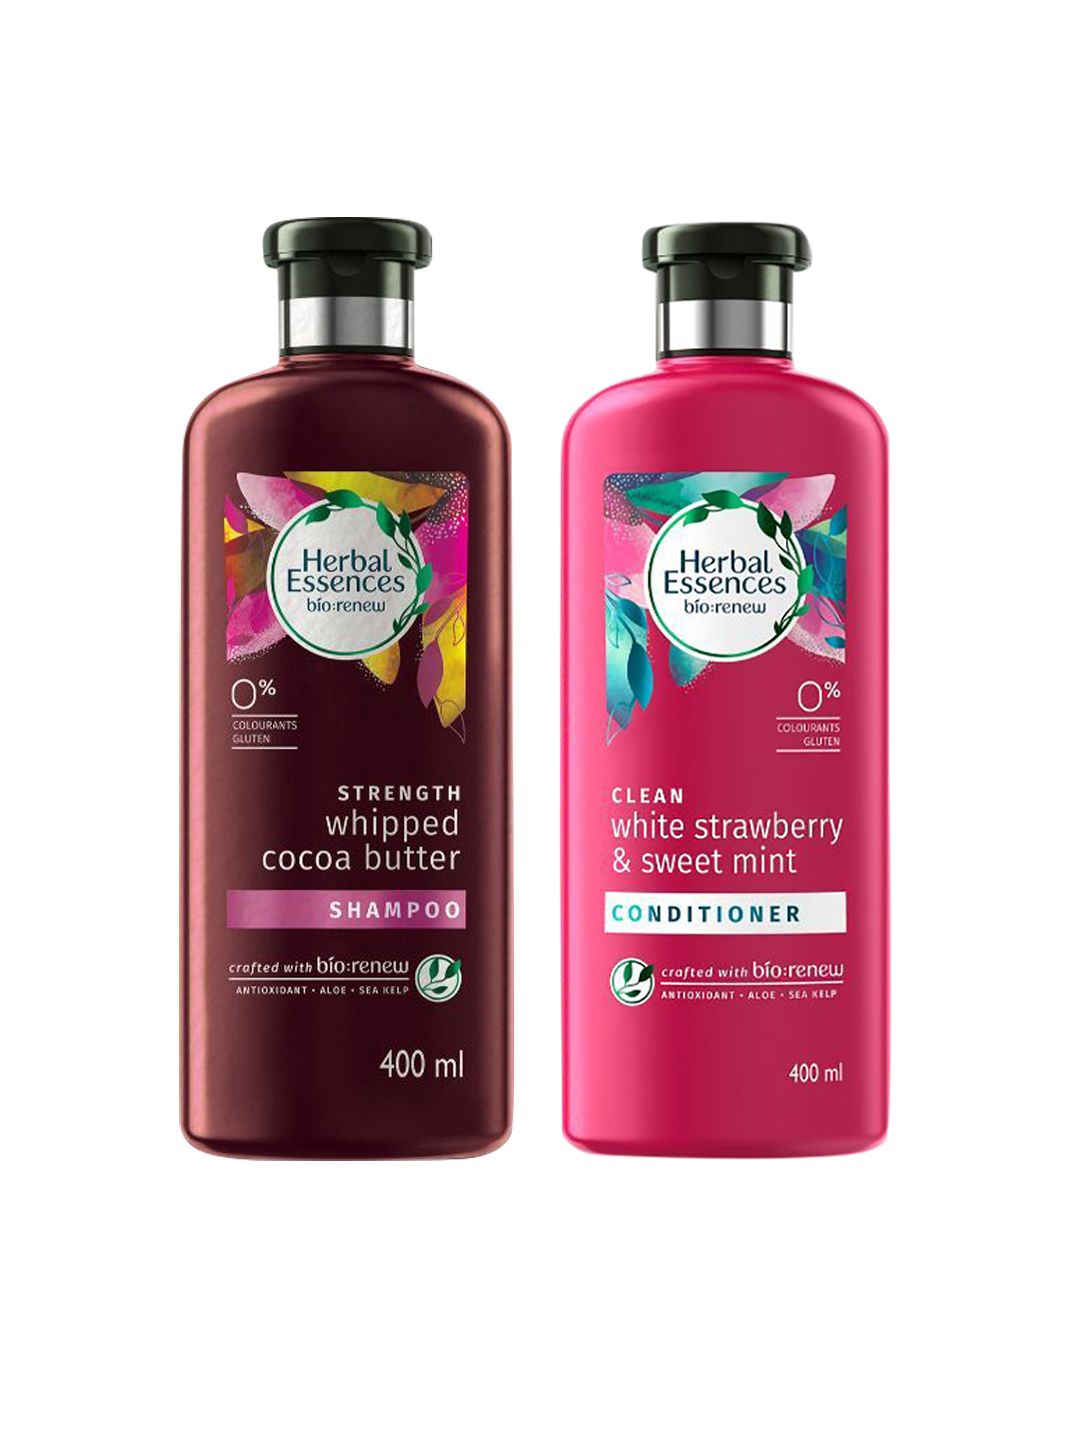 Herbal Essences Set of Cocoa Butter Shampoo & Strawberry & Sweet Mint Conditioner Price in India